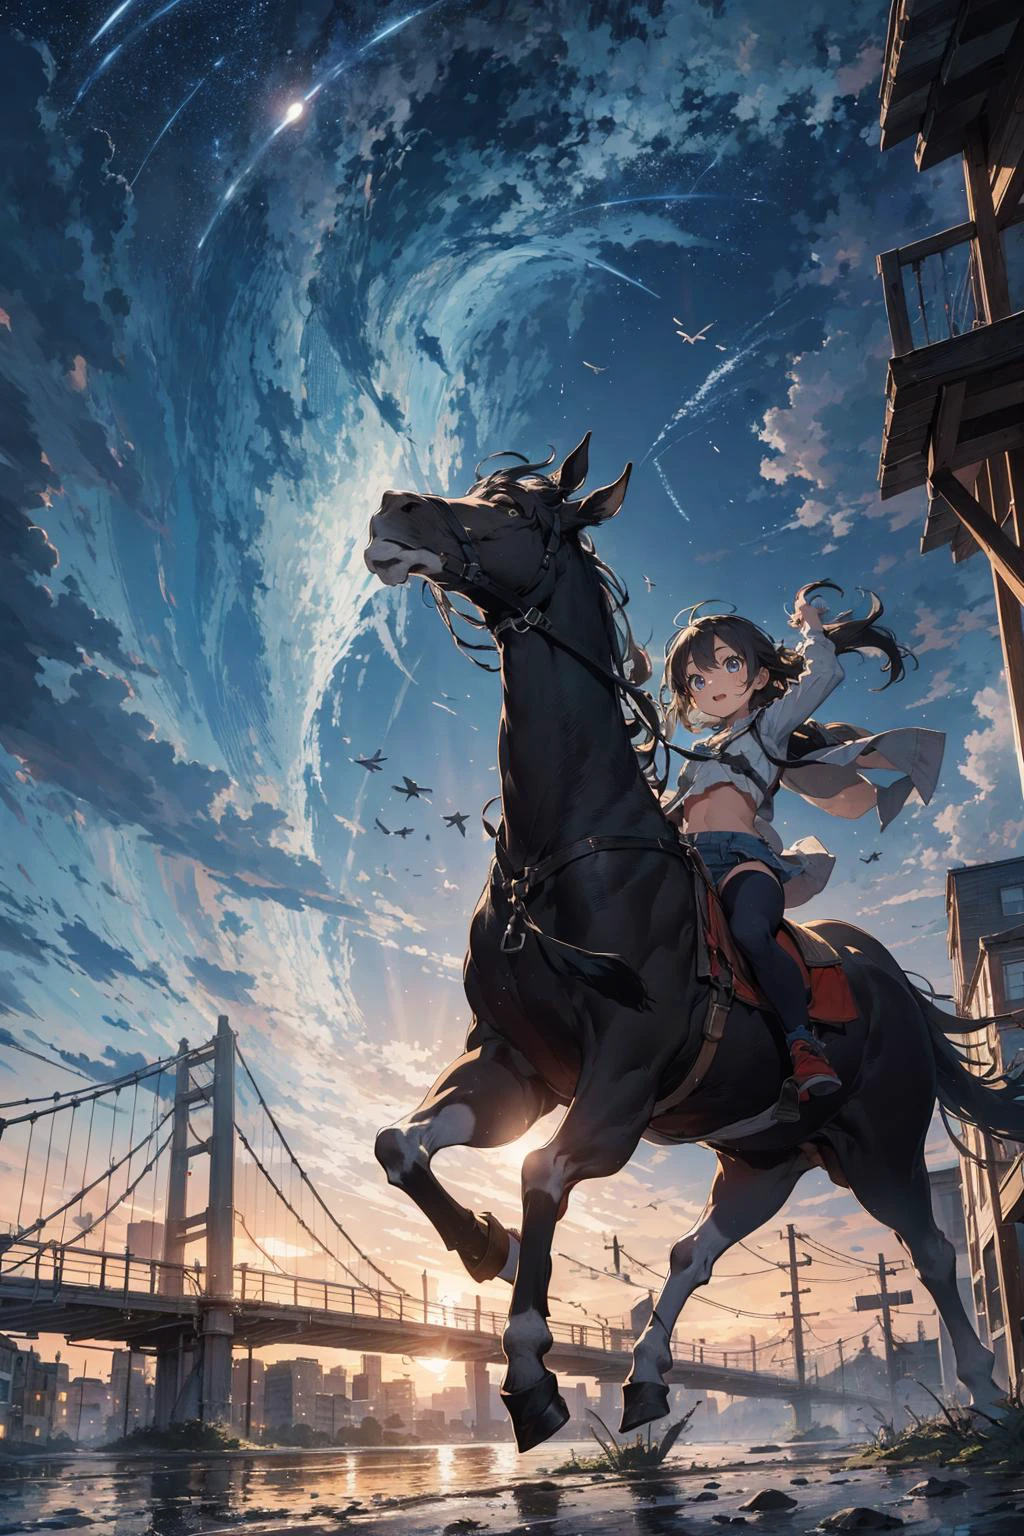 absurdres, highres, ultra detailed, (1girl:1.3),
BREAK
, Illustrate a romantic moonlit scene, with soft lighting, intimate moments, and a sense of warmth and love.
BREAK
, Create an image of a centaur galloping through grasslands, with the upper body of a human and the lower body of a horse.
BREAK
, Create a stunning starry sky image, with long exposures capturing the beauty and movement of celestial bodies.
BREAK
, Capture an urban cityscape, featuring towering buildings, bustling streets, and a dynamic atmosphere.
BREAK
, Create a scene of children playing, capturing their innocence, energy, and sense of wonder and exploration.
BREAK
, Capture the primal appeal of primitive art, with bold, simplified shapes, strong colors, and an emphasis on raw emotion and instinct.